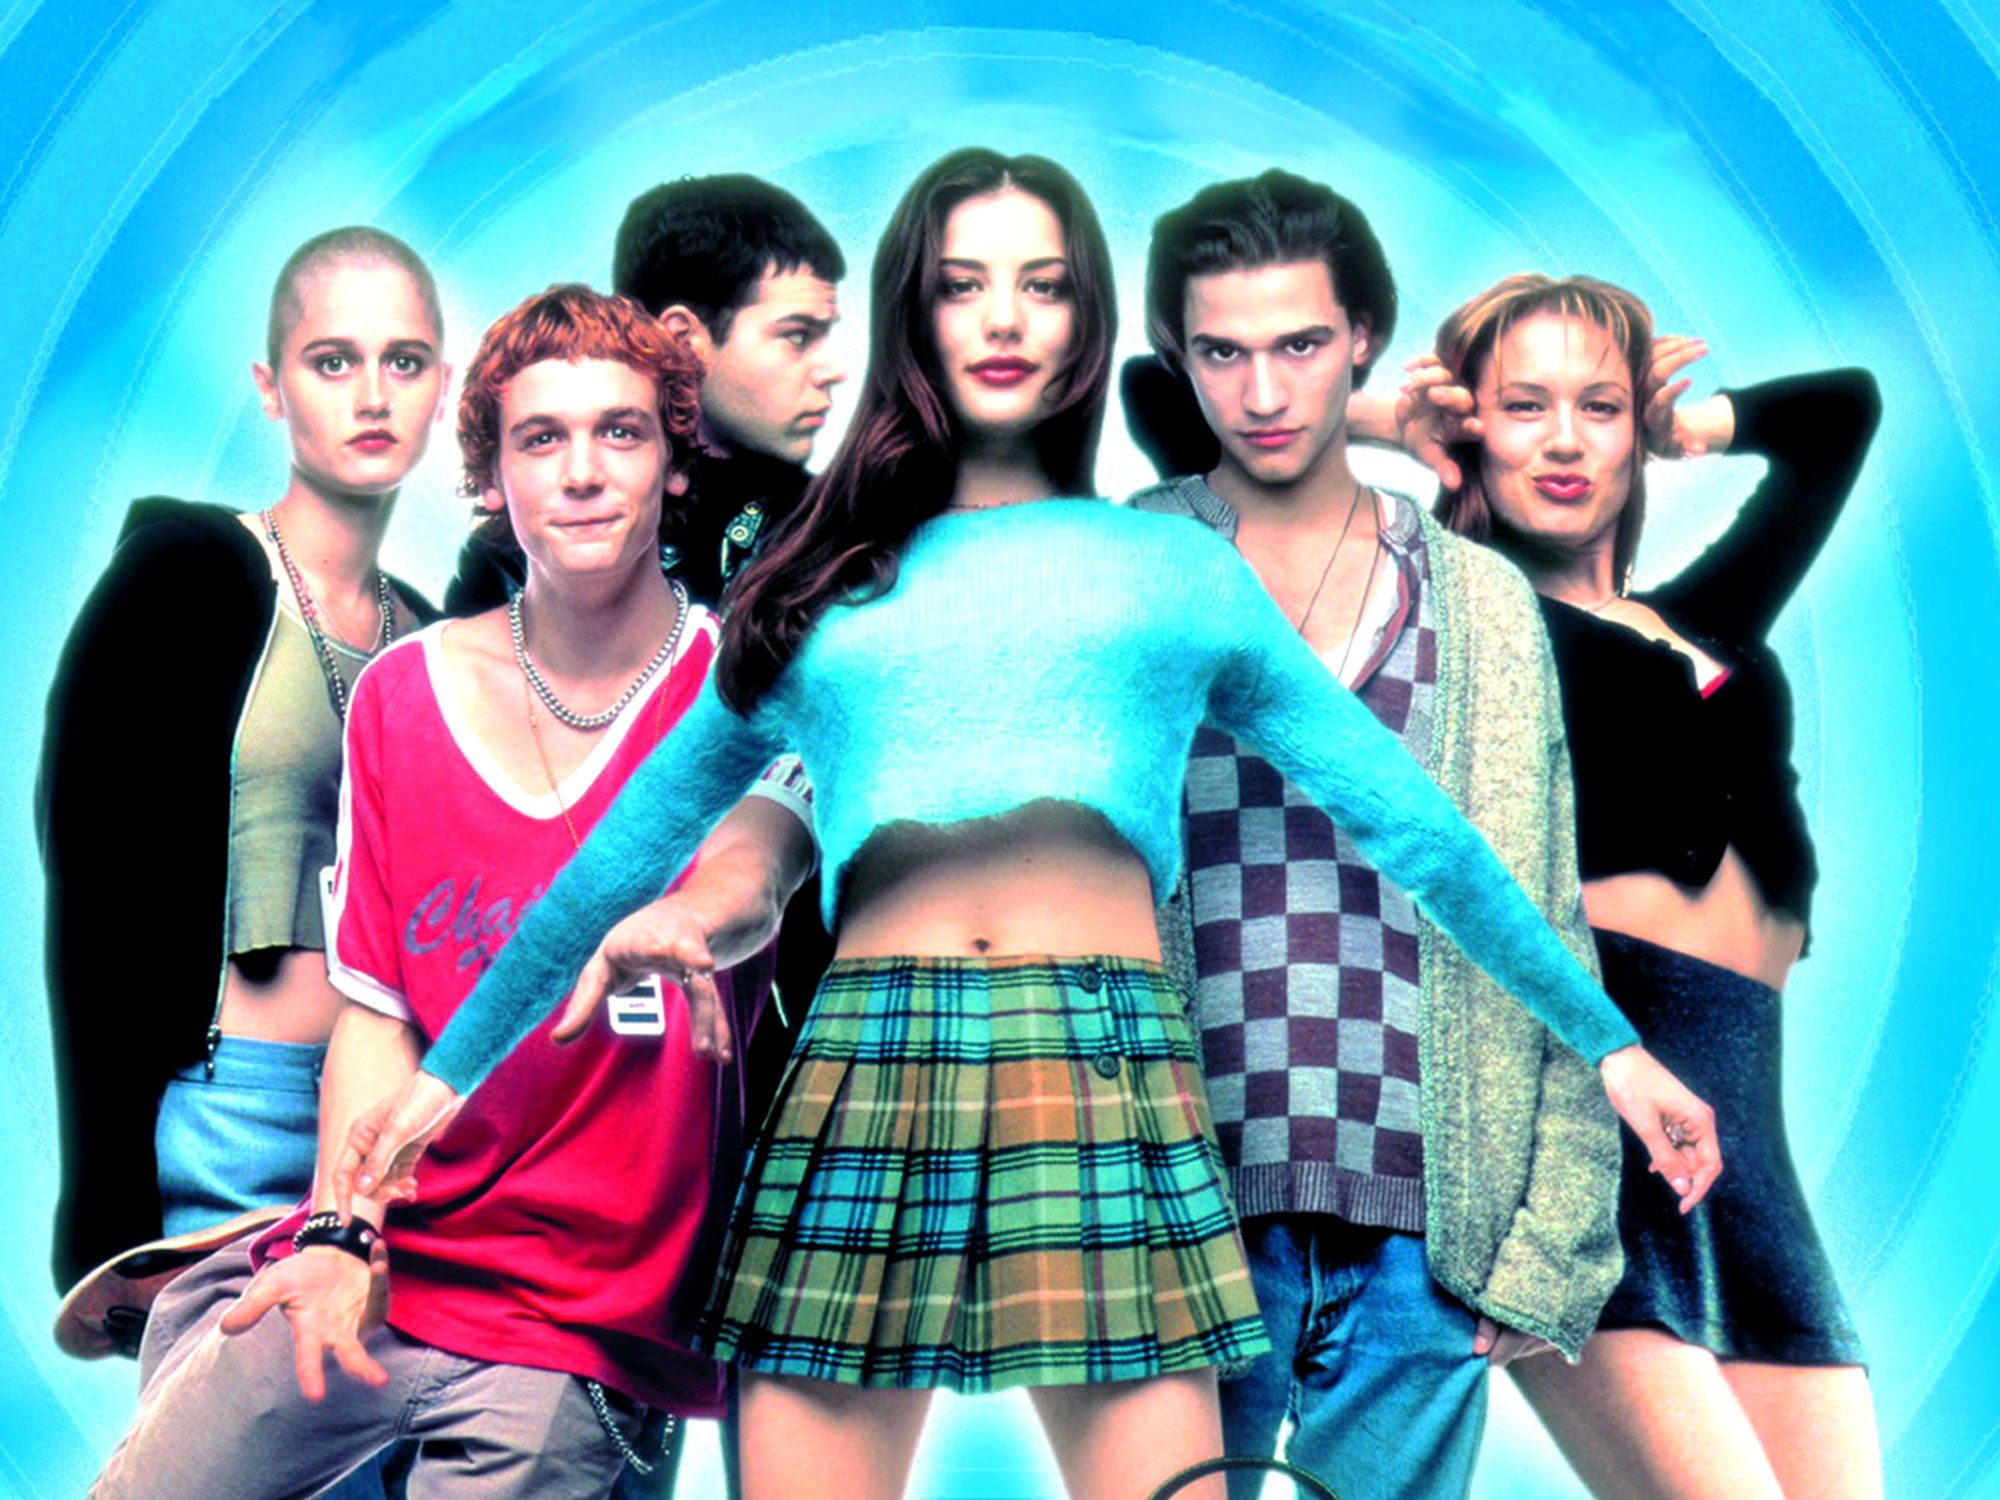 Empire records outfits